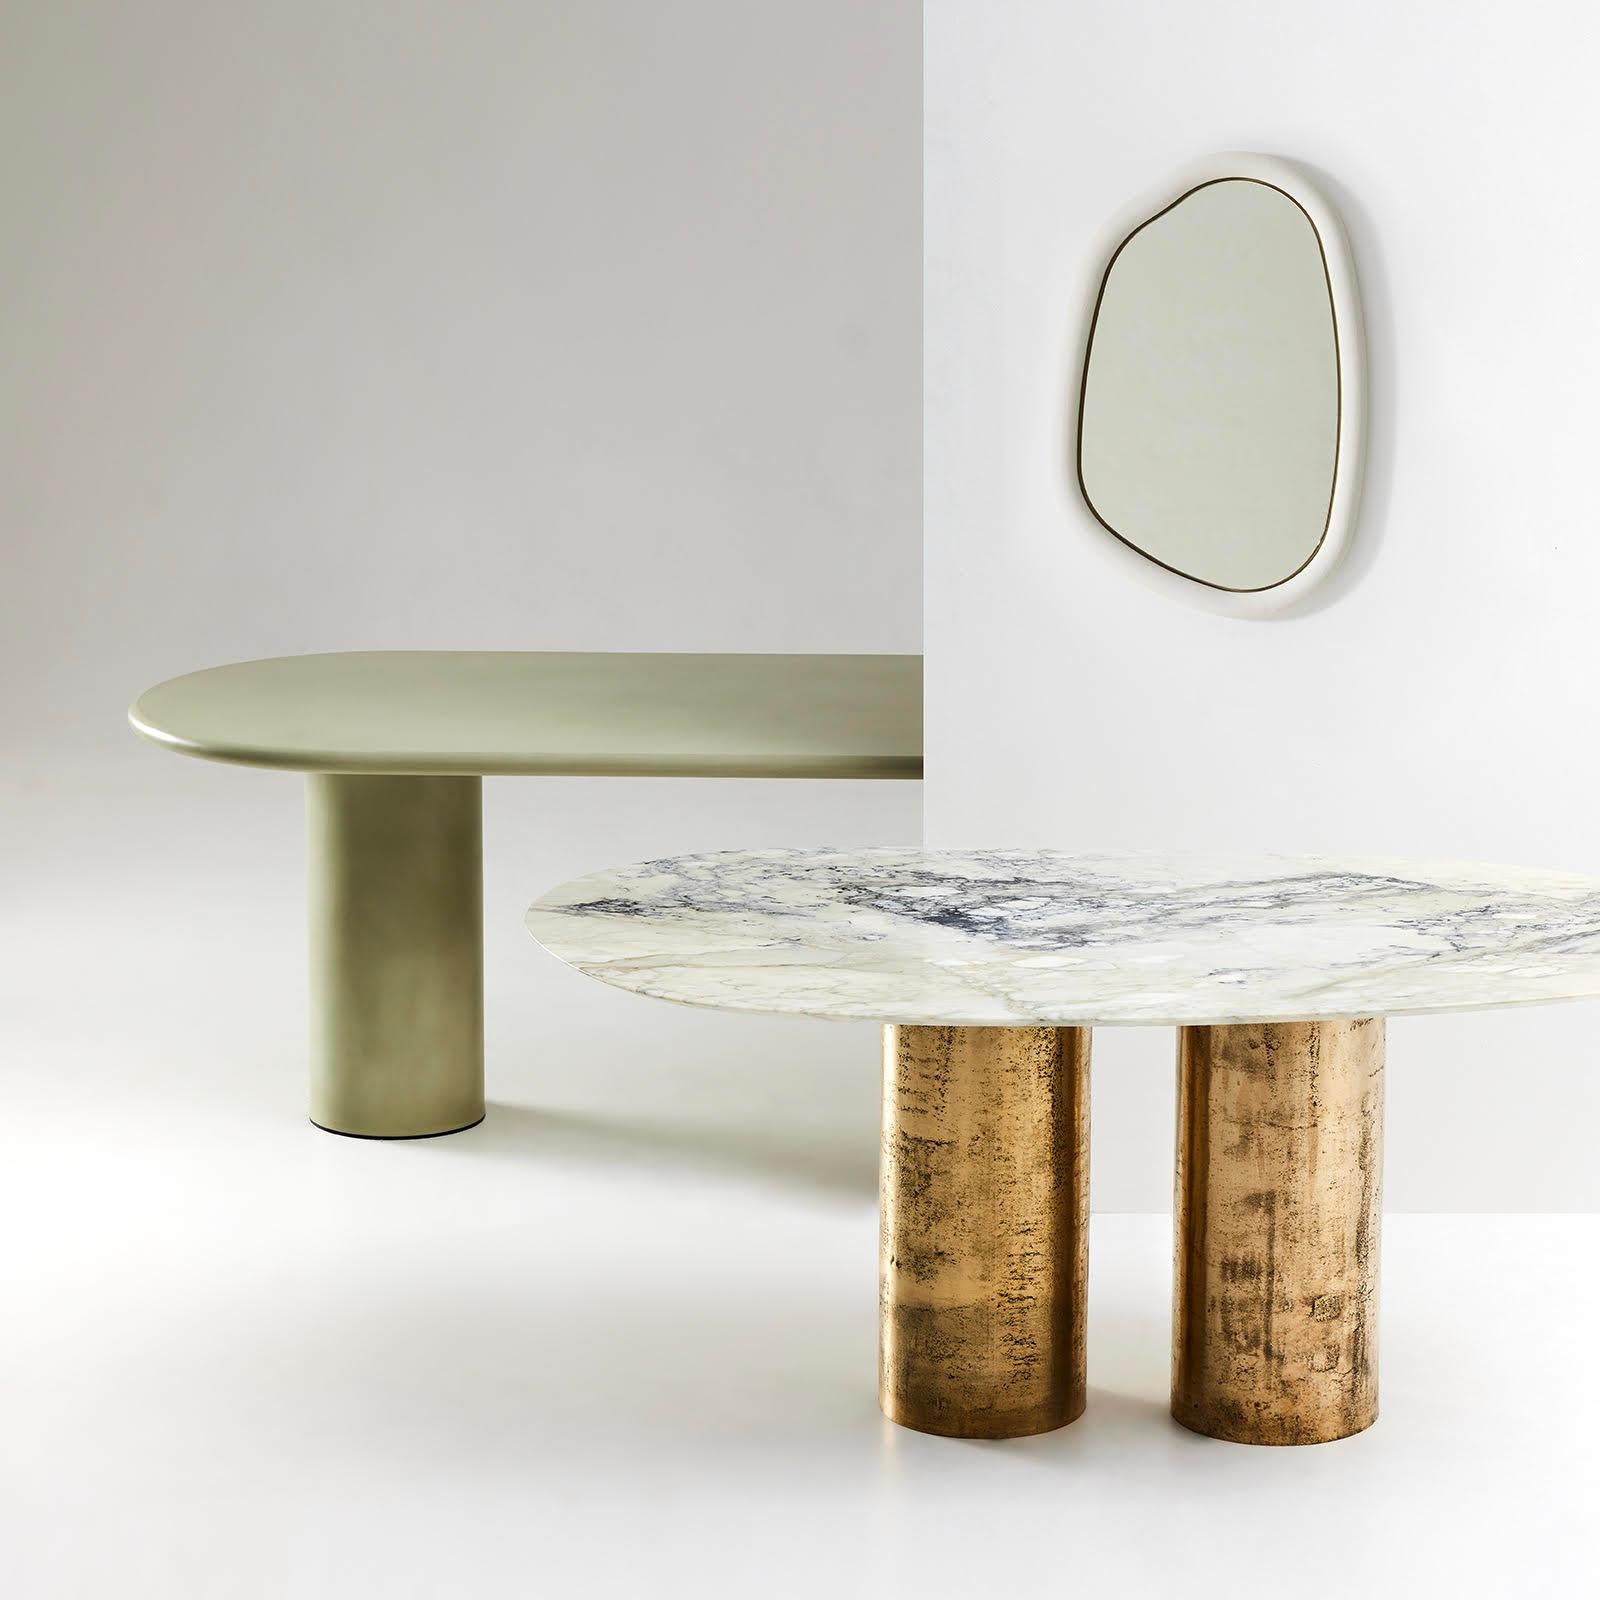 Gaelle mirror by Philippe Colette
Dimensions: D 60 x H 90 cm
Materials: mineral lime plaster.
With or without indirect lighting.
All shapes and sizes can be customized. Wide range of colors.




